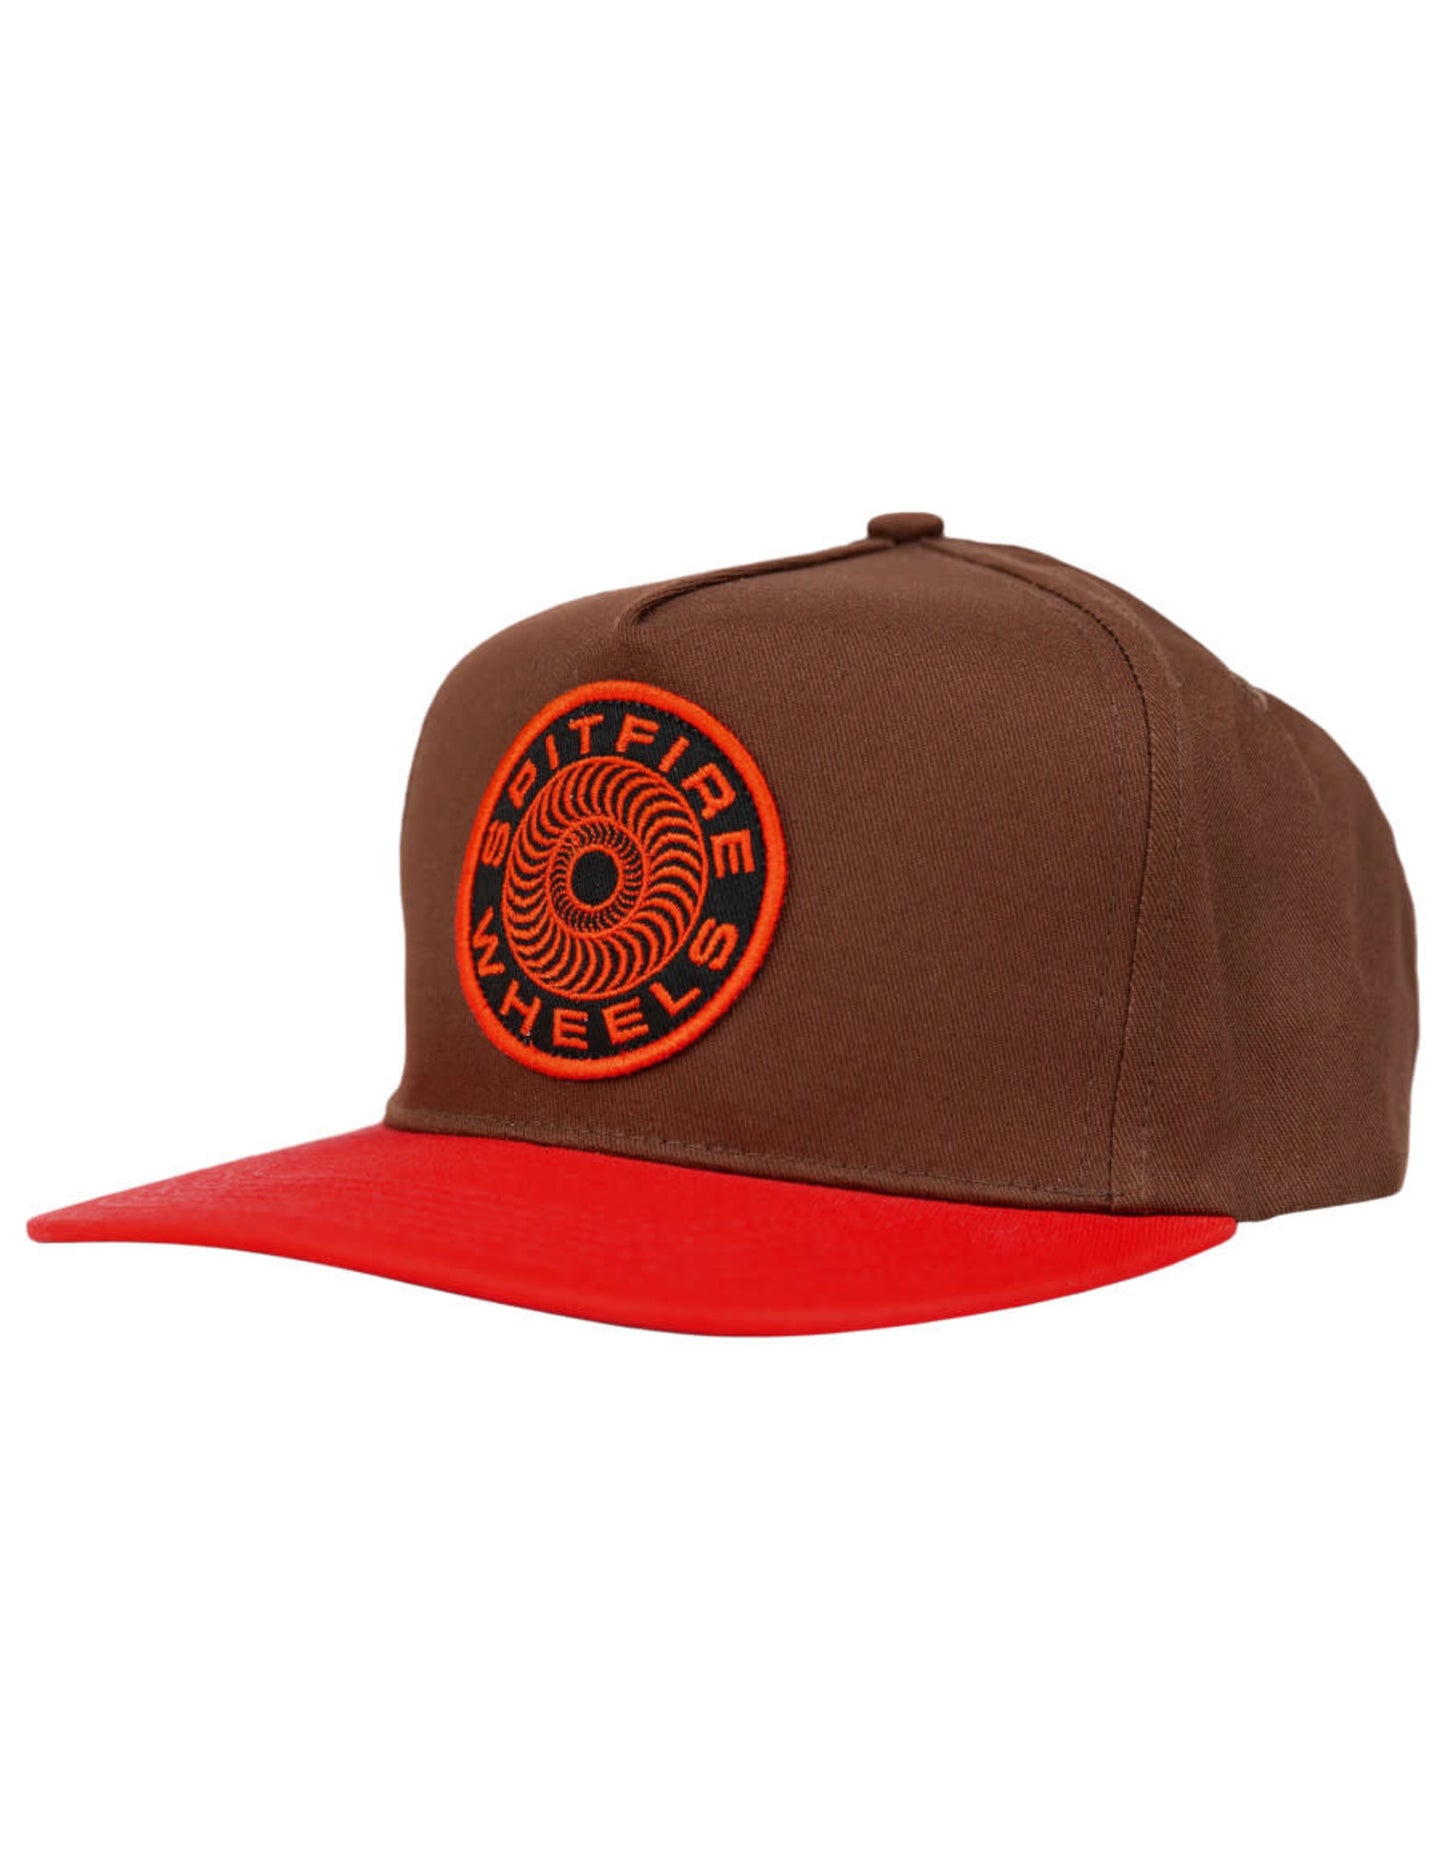 SPITFIRE CLASSIC '87 SWIRL PATCH HAT - BROWN RED